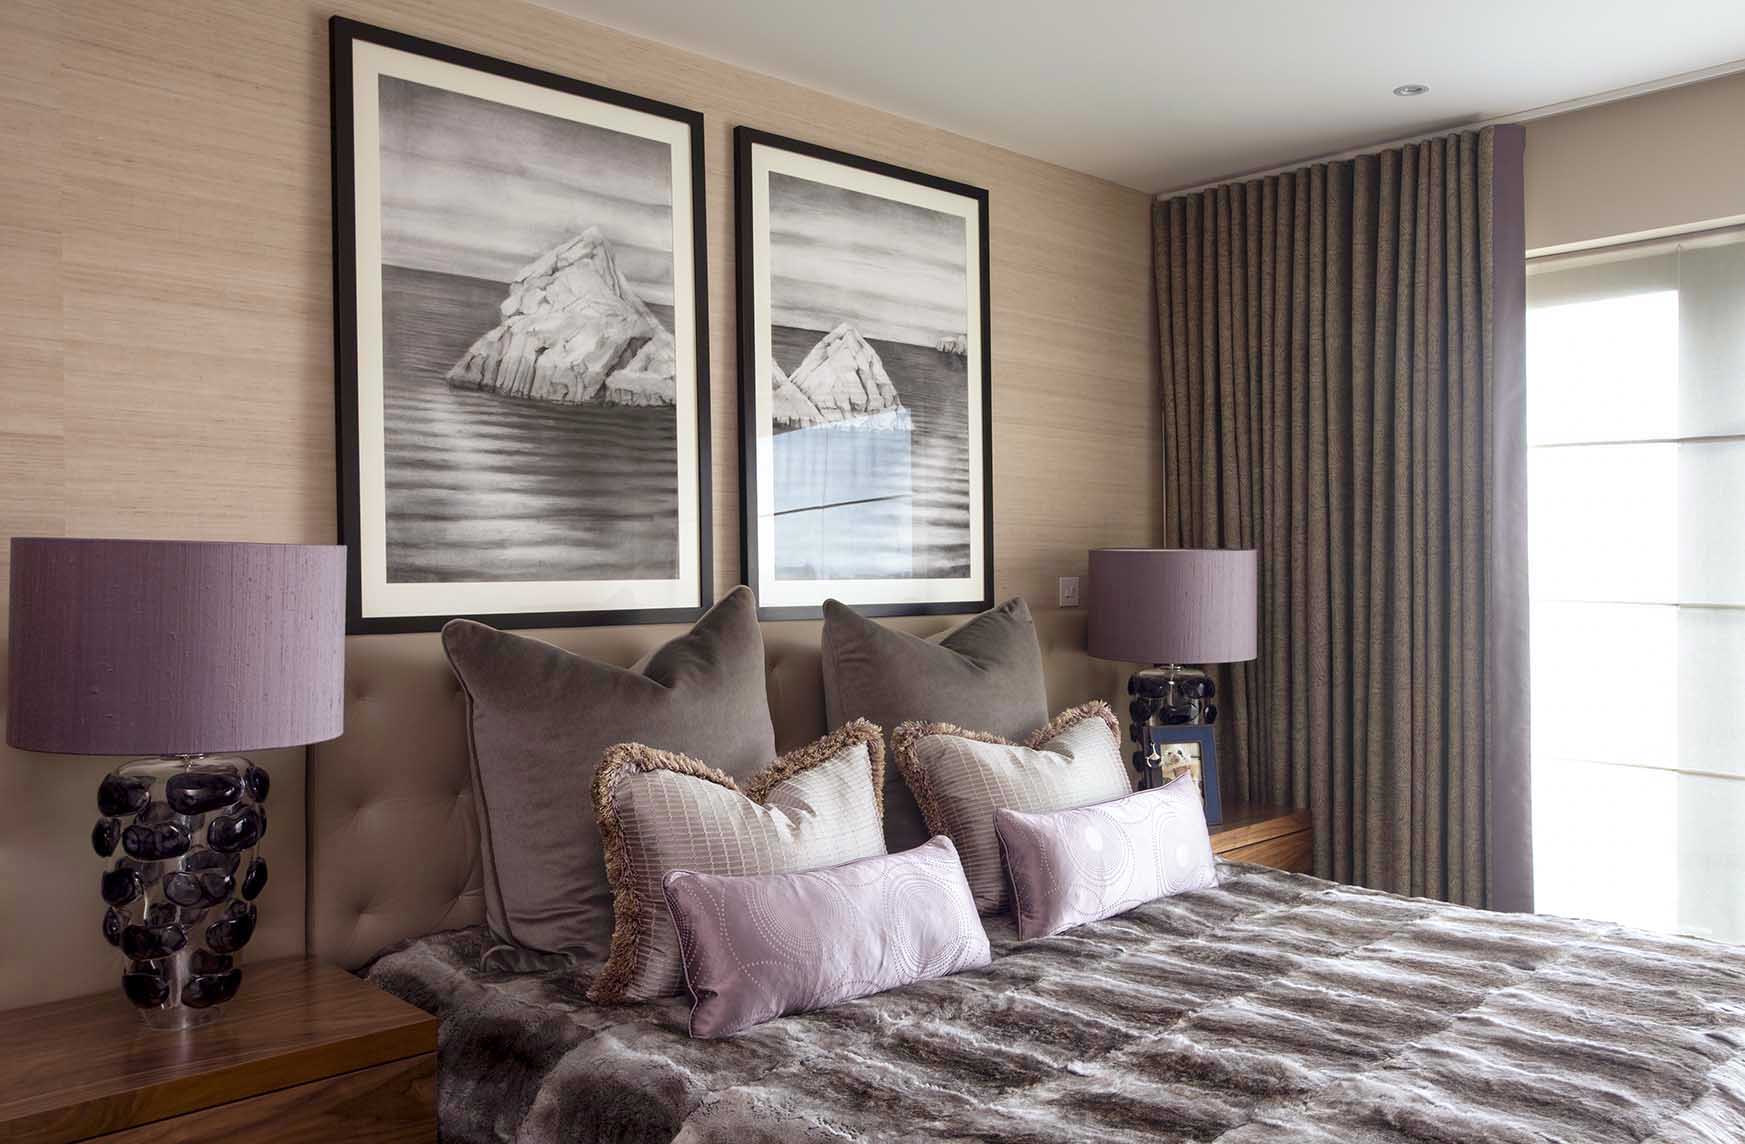 Master bedroom design, fur throw, bespoke art, silk wall covering, glass bedside lamps in mauve